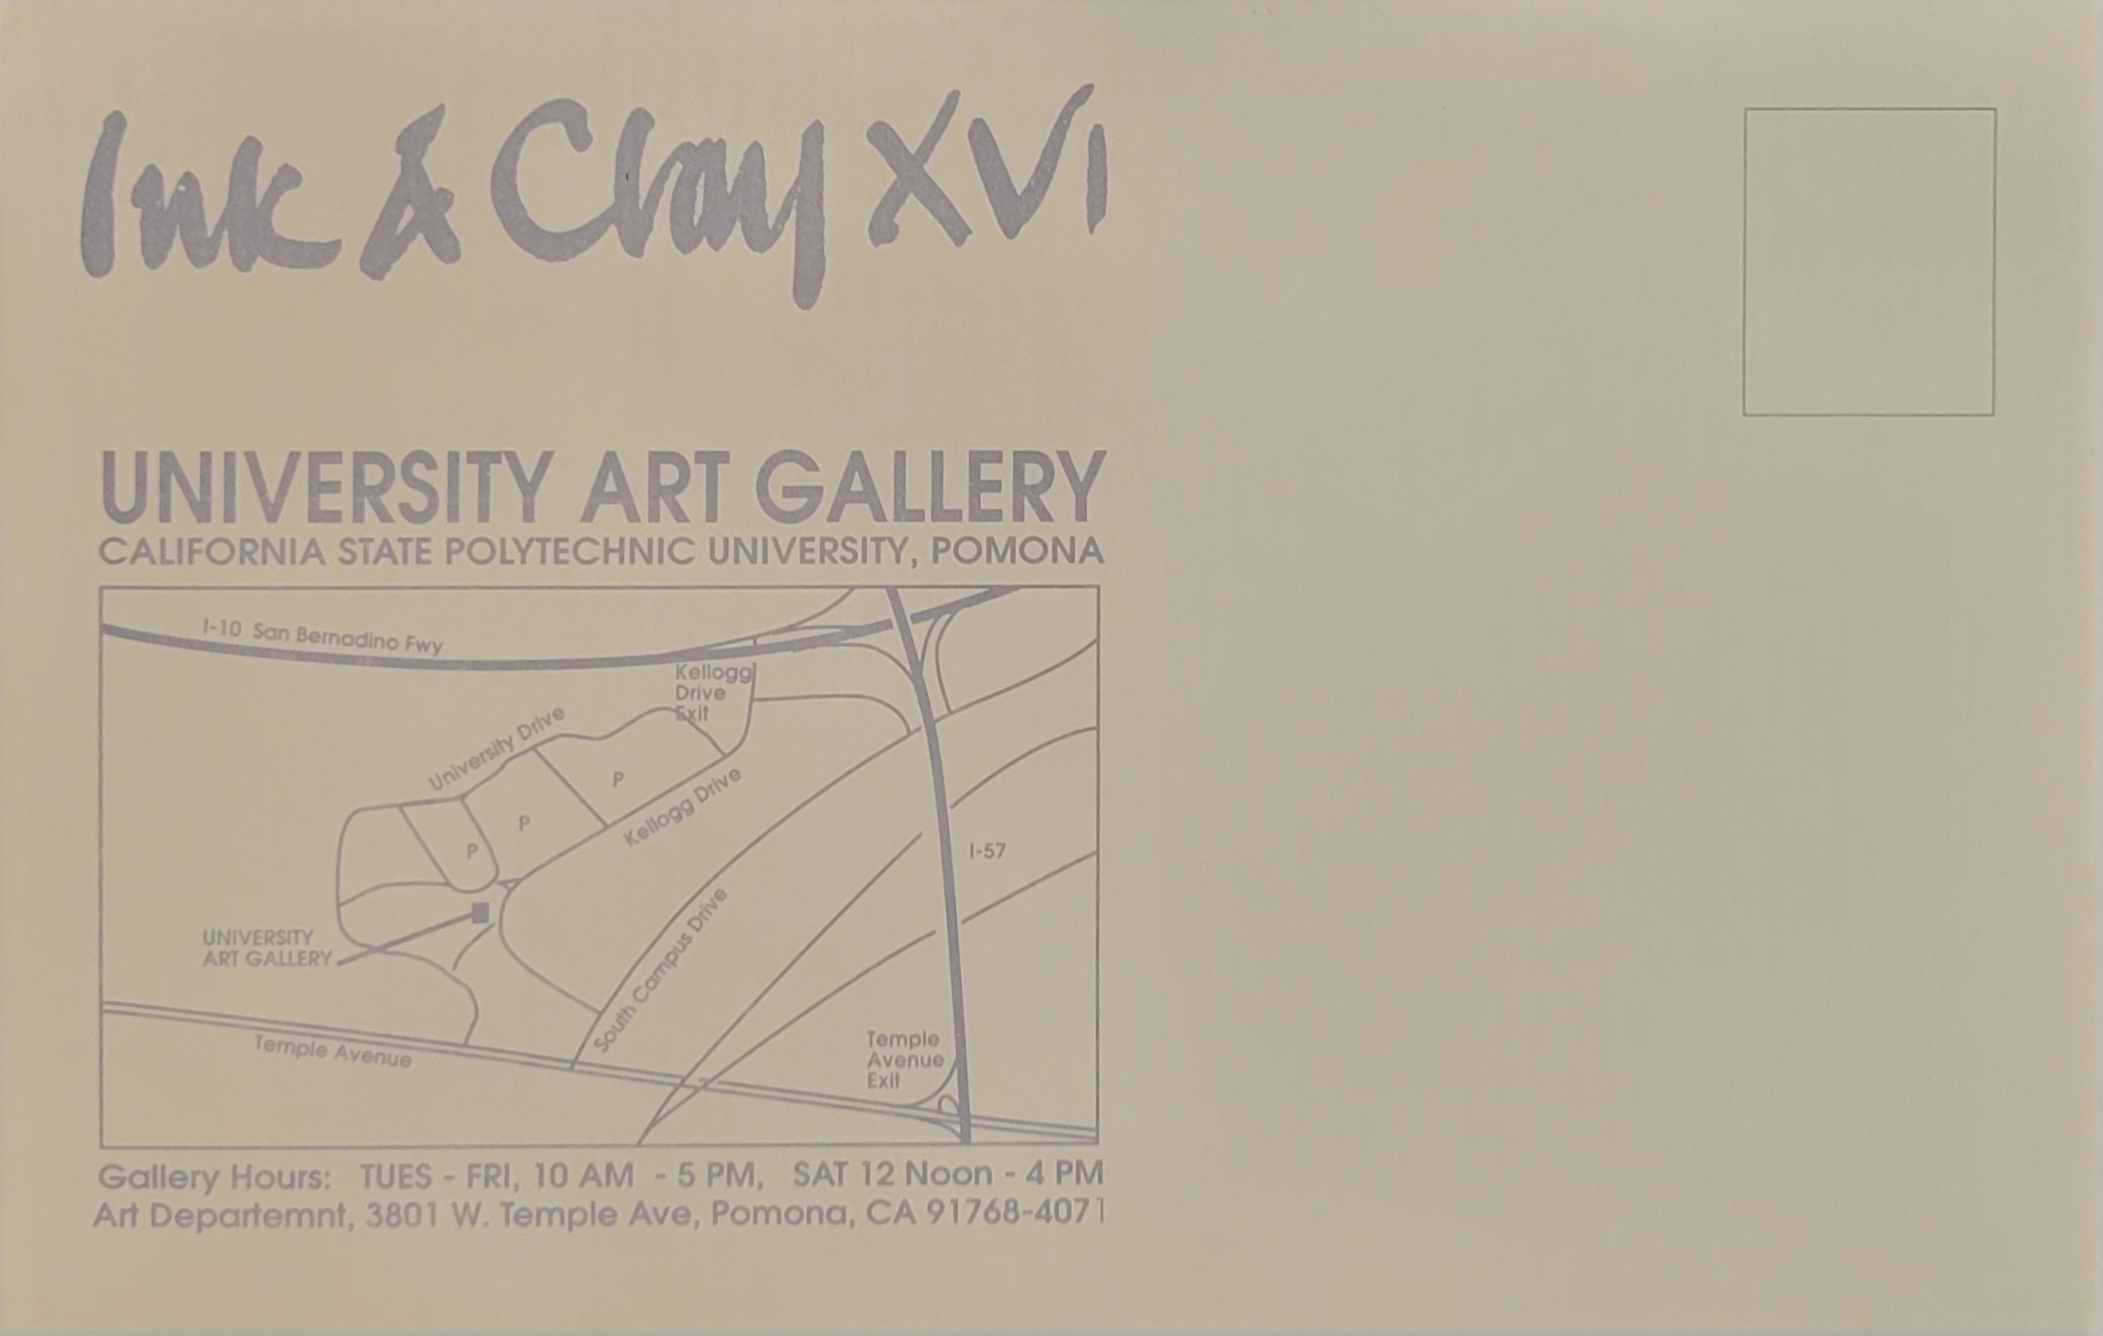 Thursday, January 11, 1990 - 7:00 PM to 9:00 PM Opening Reception: Ink & Clay 21